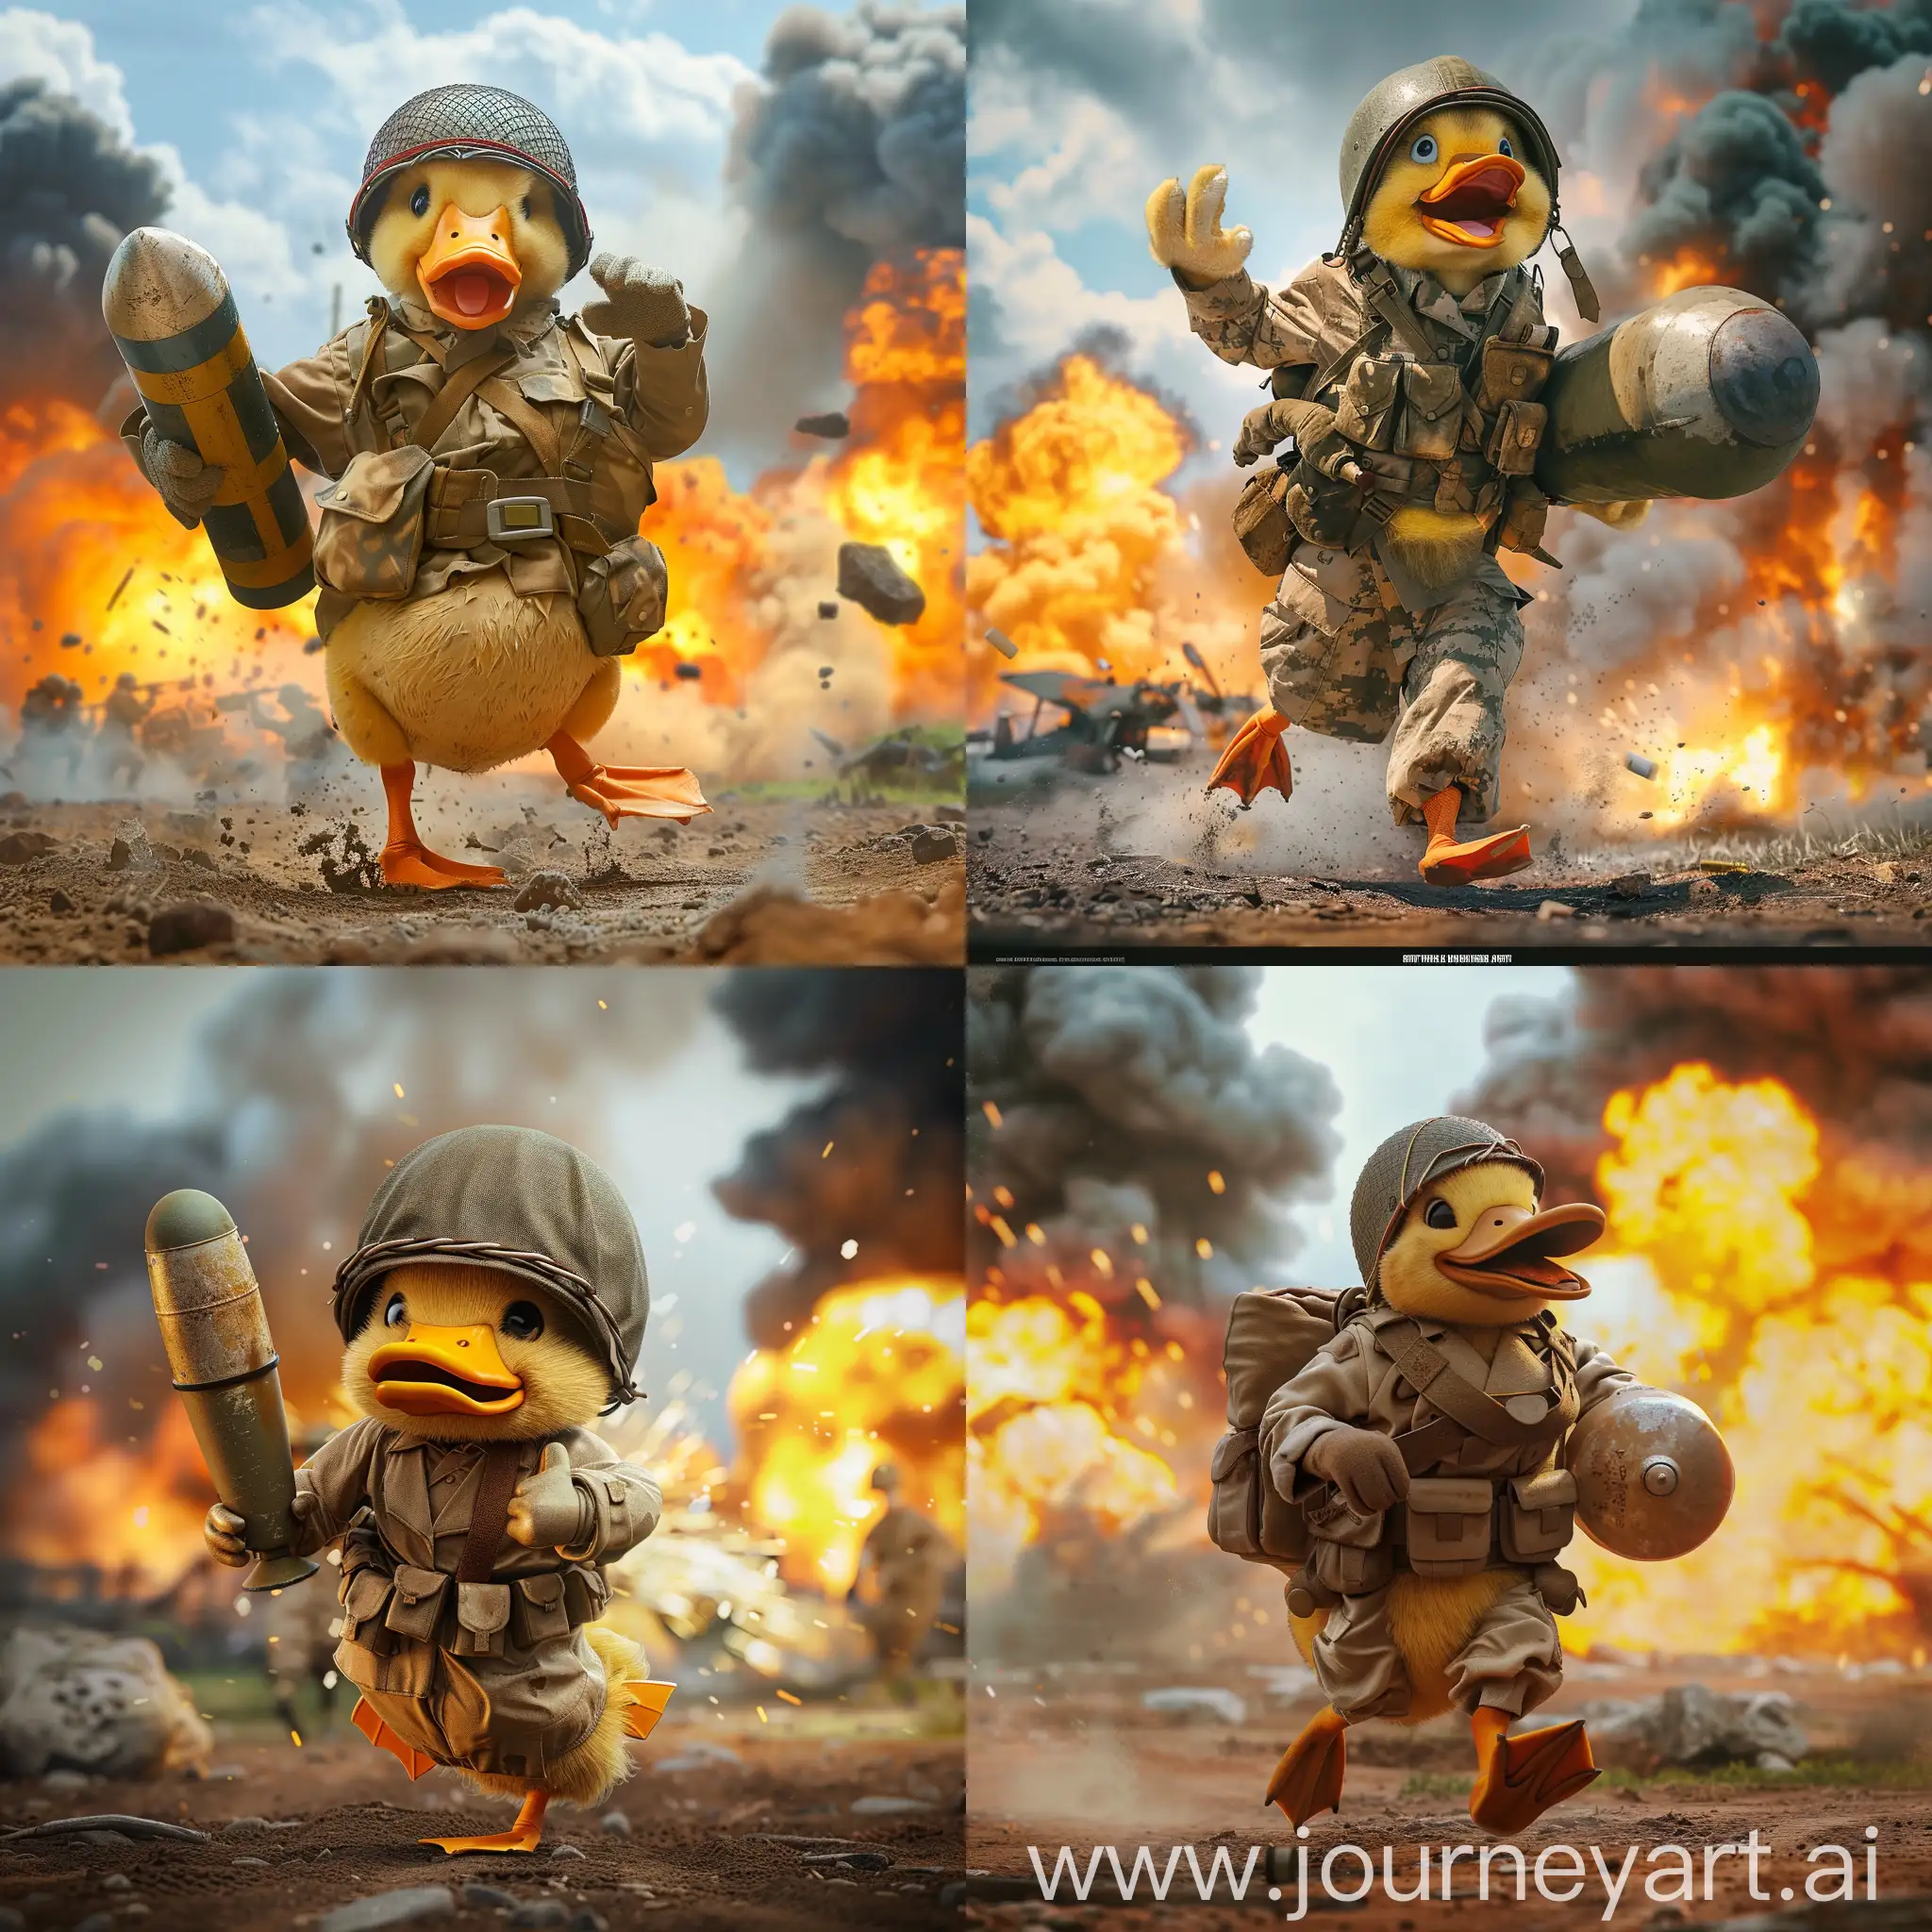 Adorable-Duck-Soldier-Carrying-WWII-Bomb-Amid-Explosive-Battlefield-Scene